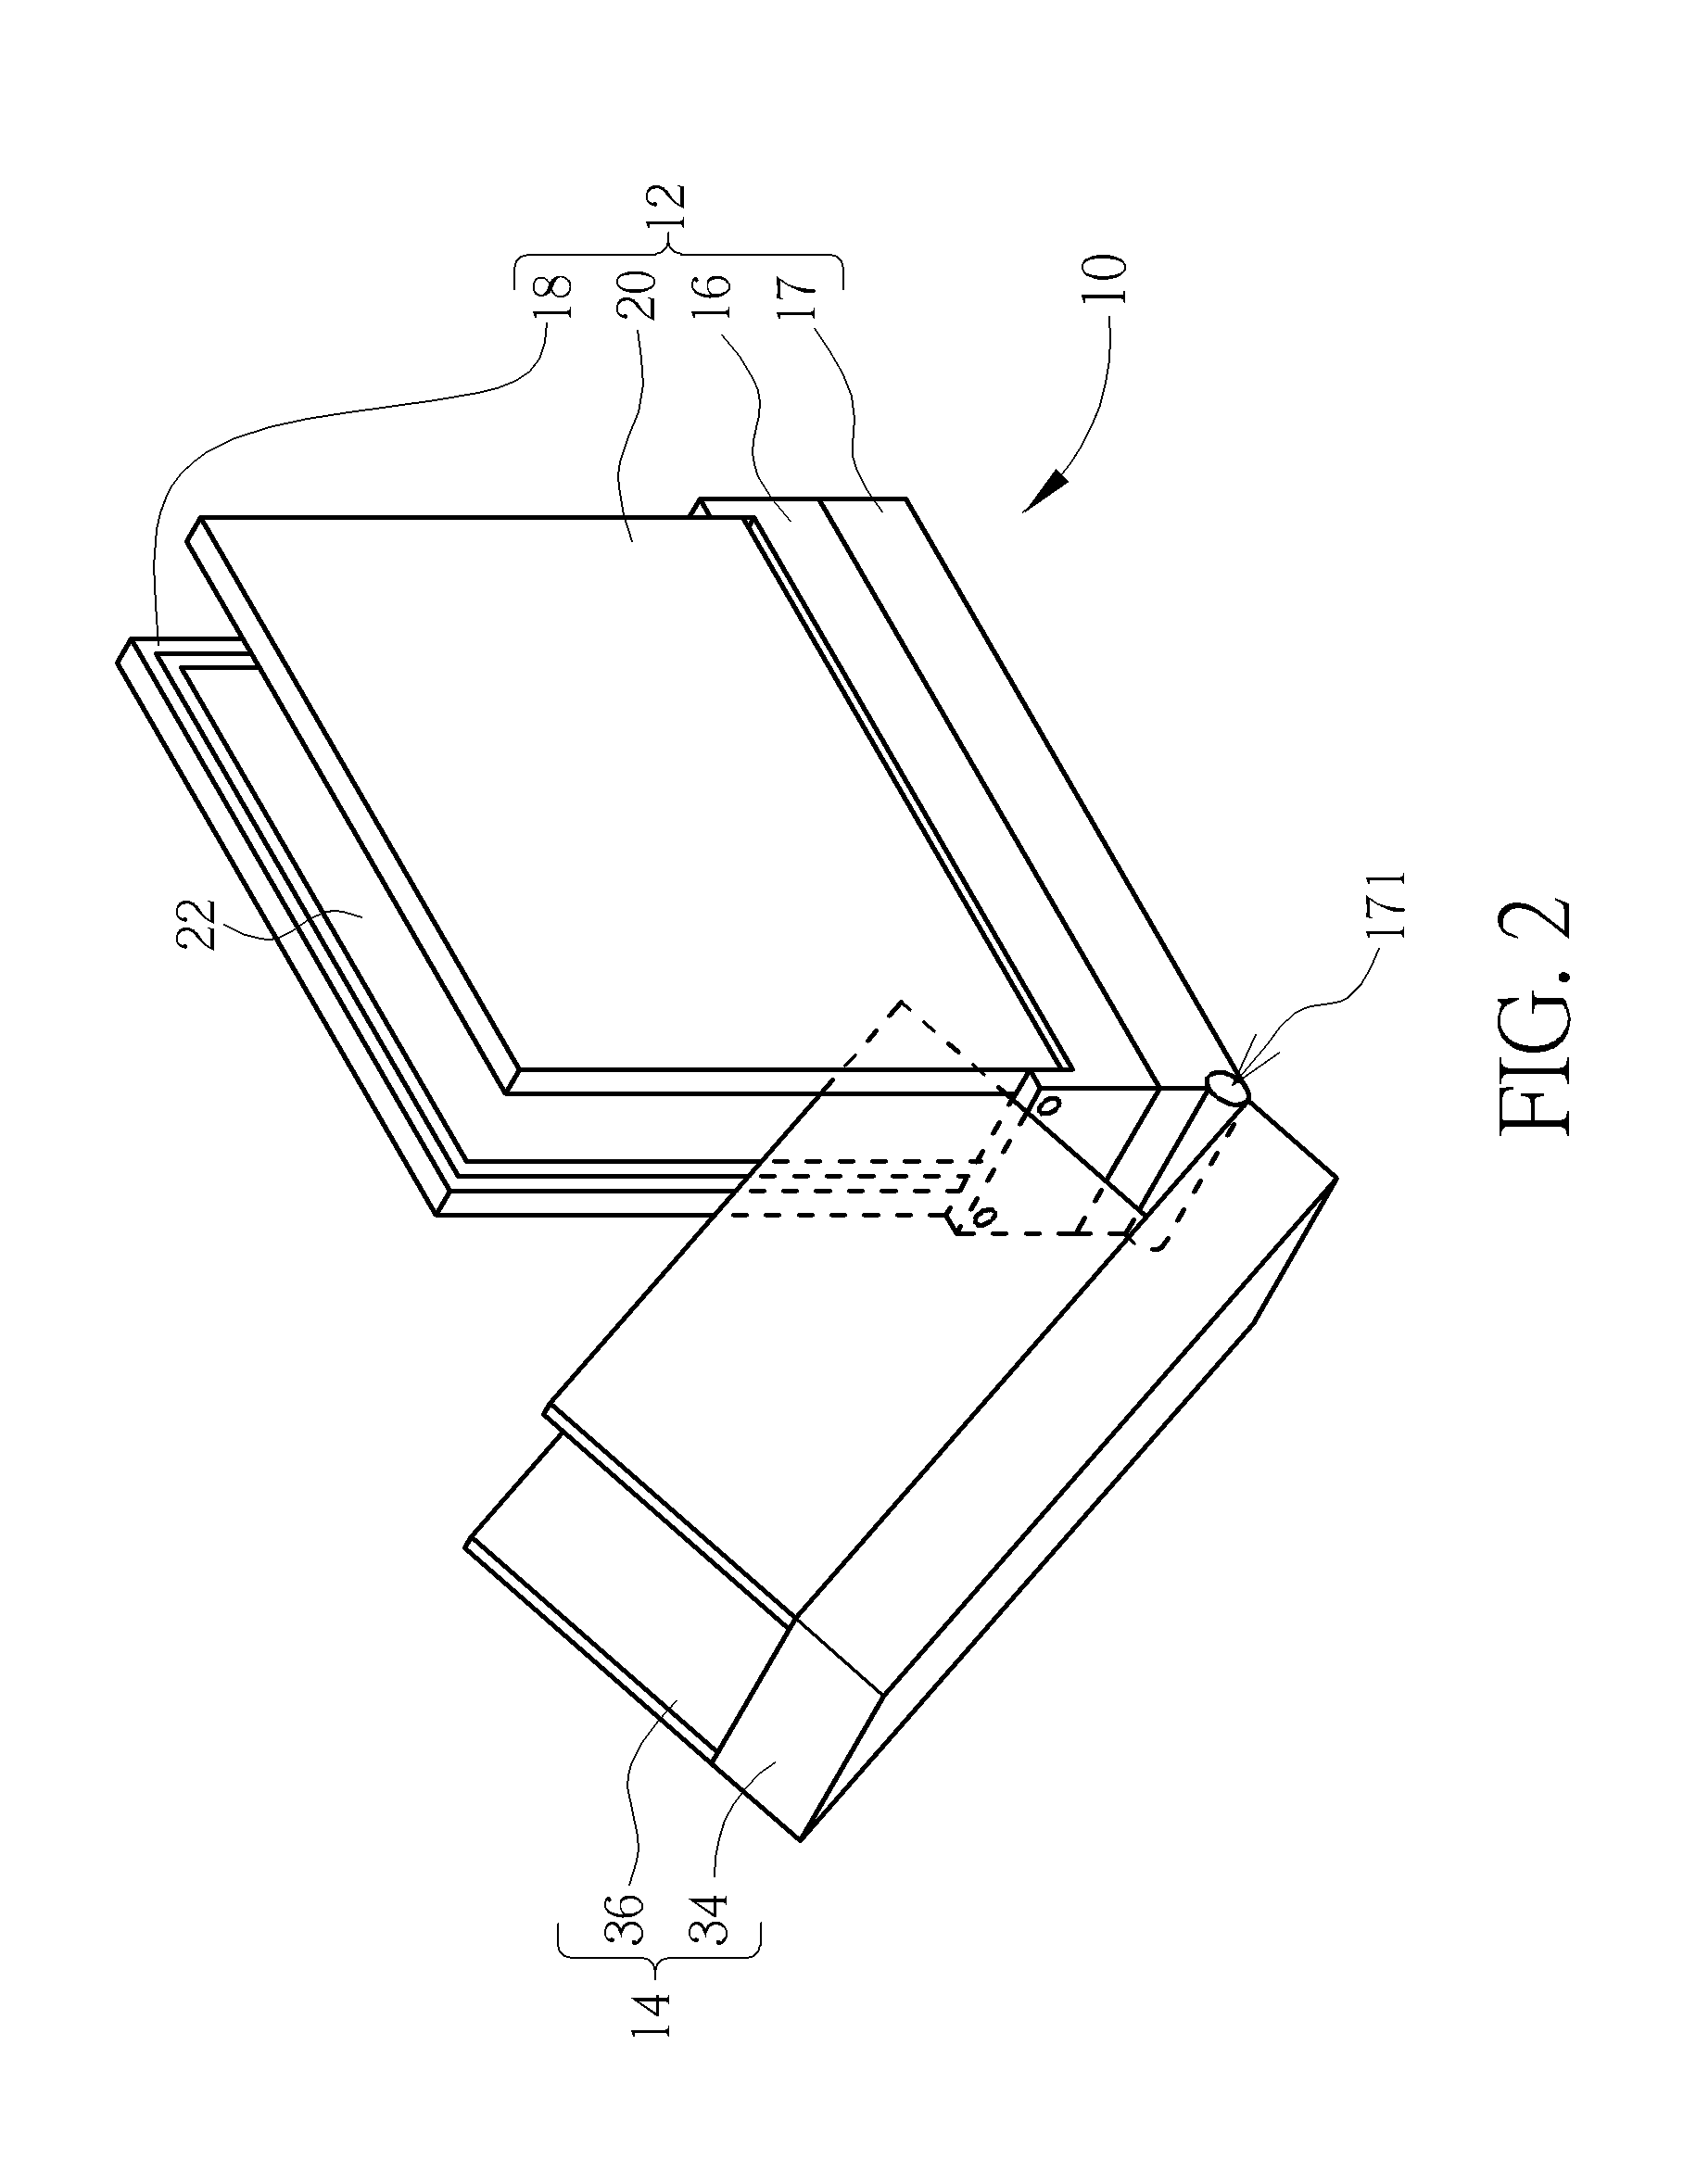 Electronic device with a fold mode and an unfold mode